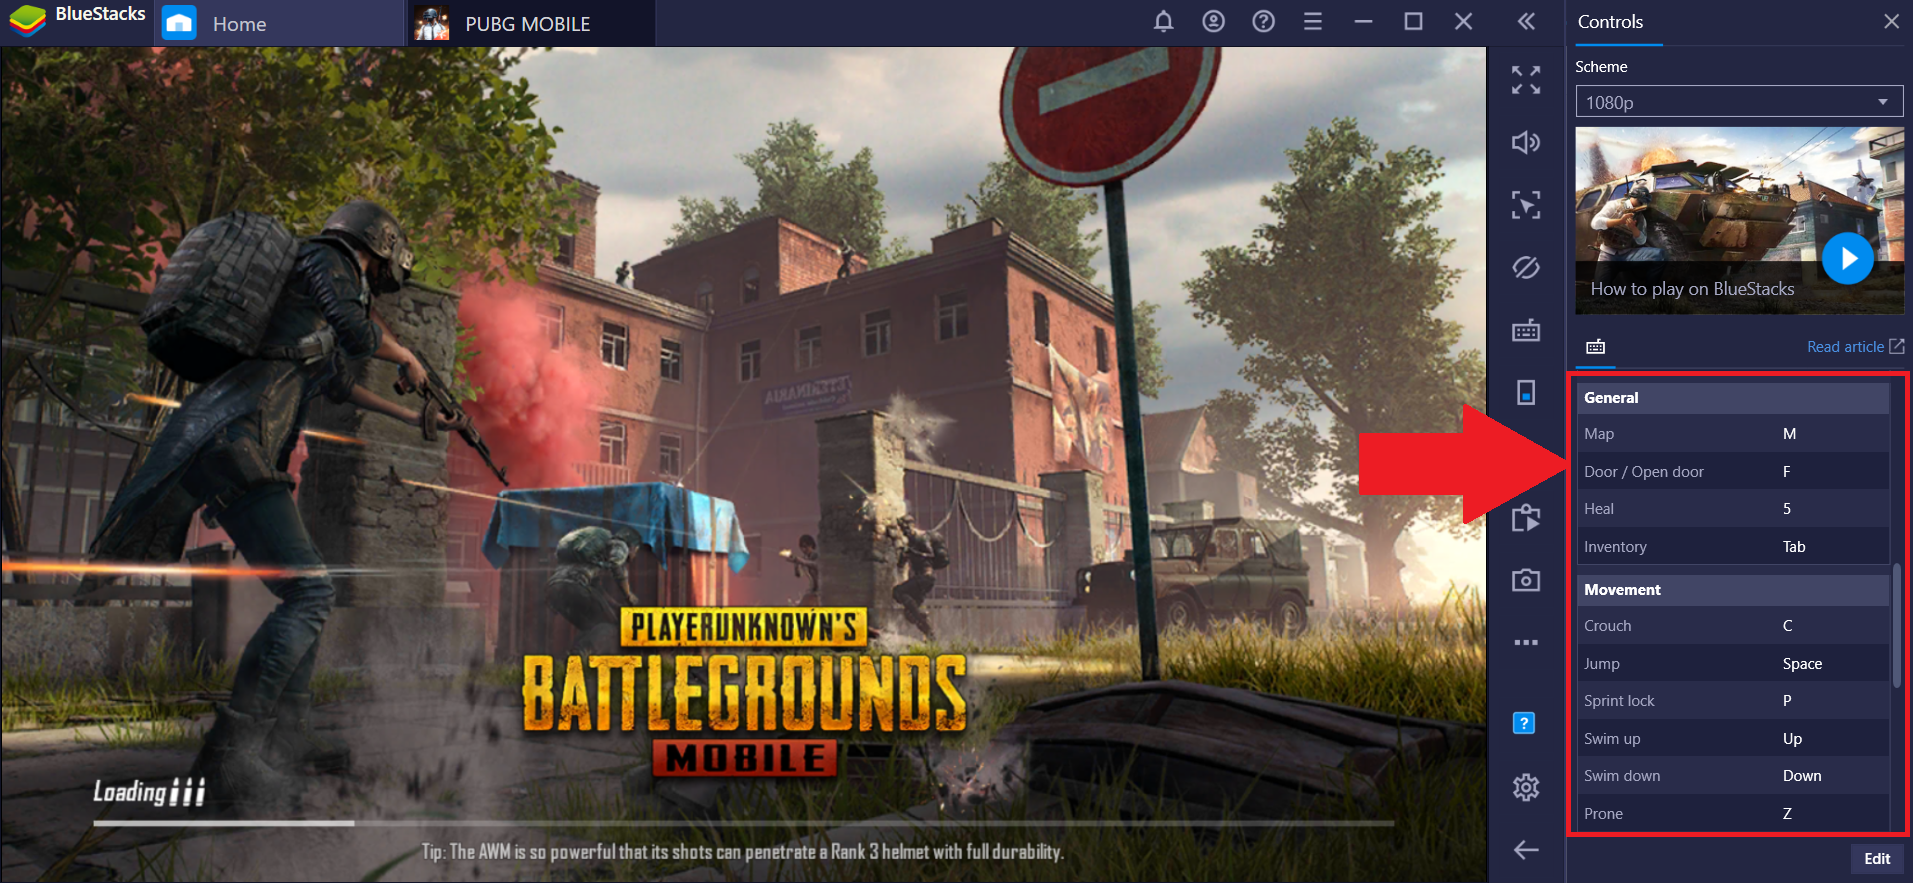 Keyboard Controls For Pubg Mobile On Bluestacks 4 205 And Above Bluestacks Support